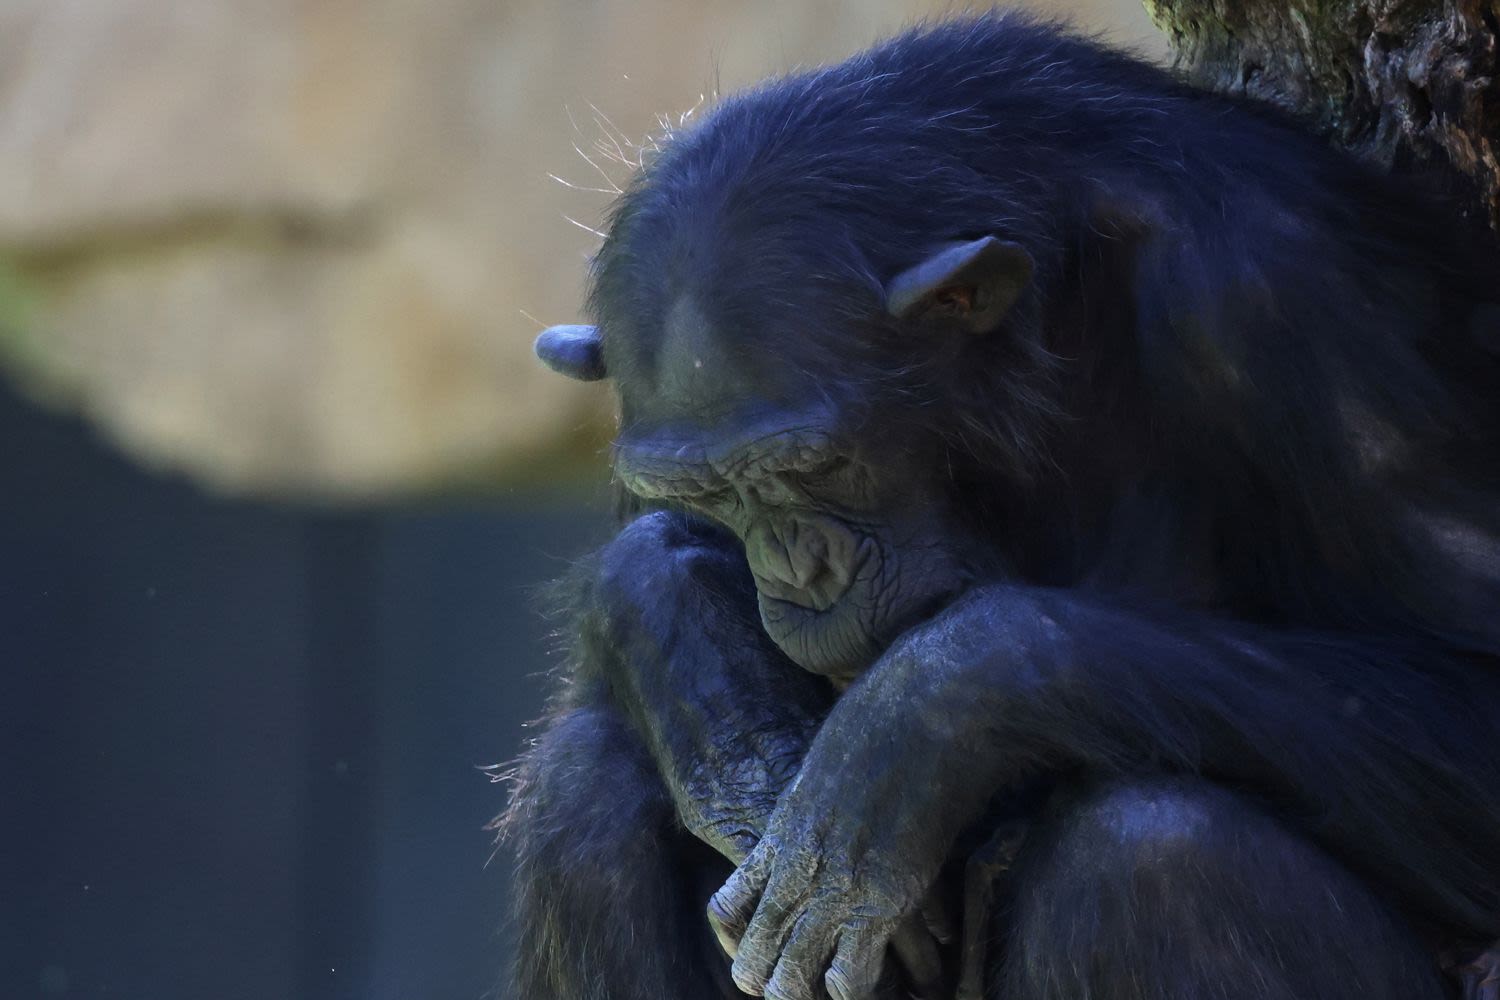 Grieving Zoo Chimpanzee Continues to Cling to Her Late Child Three Months After Baby's Death